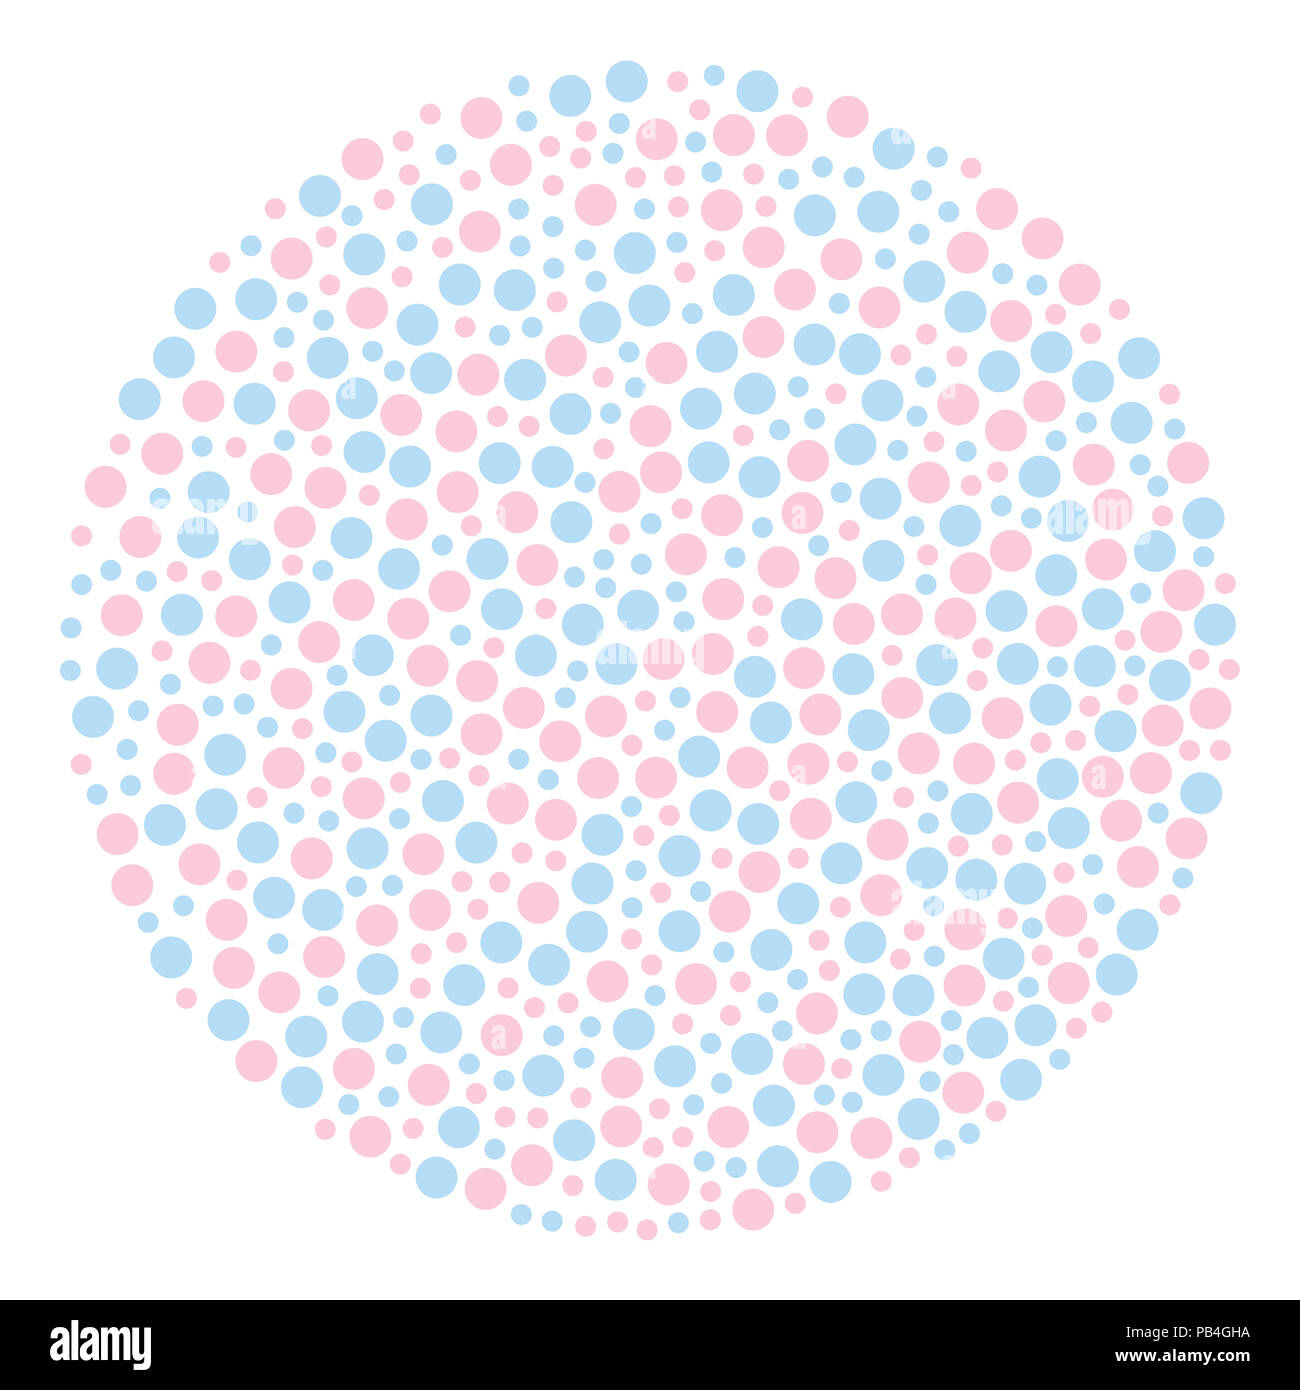 Circle shaped background made of dots, colored in baby blue and baby pink. Circular area made of randomly placed colored little spots. Spotted area. Stock Photo